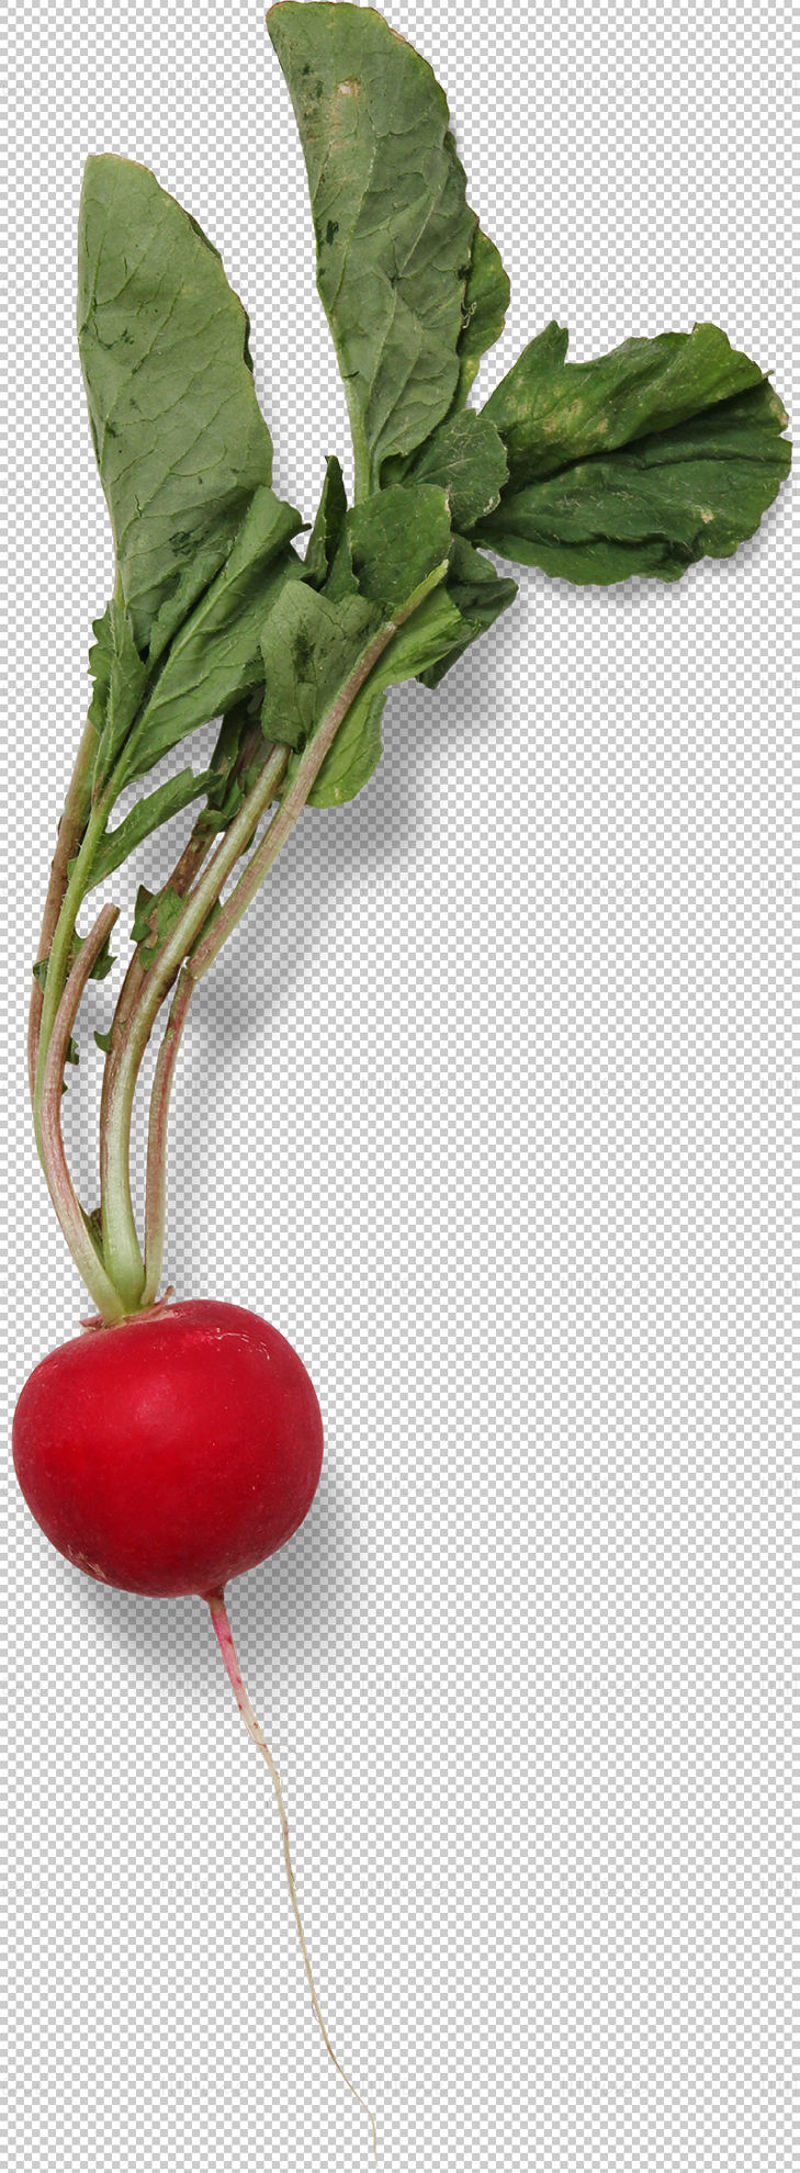 Radish with green leaves png